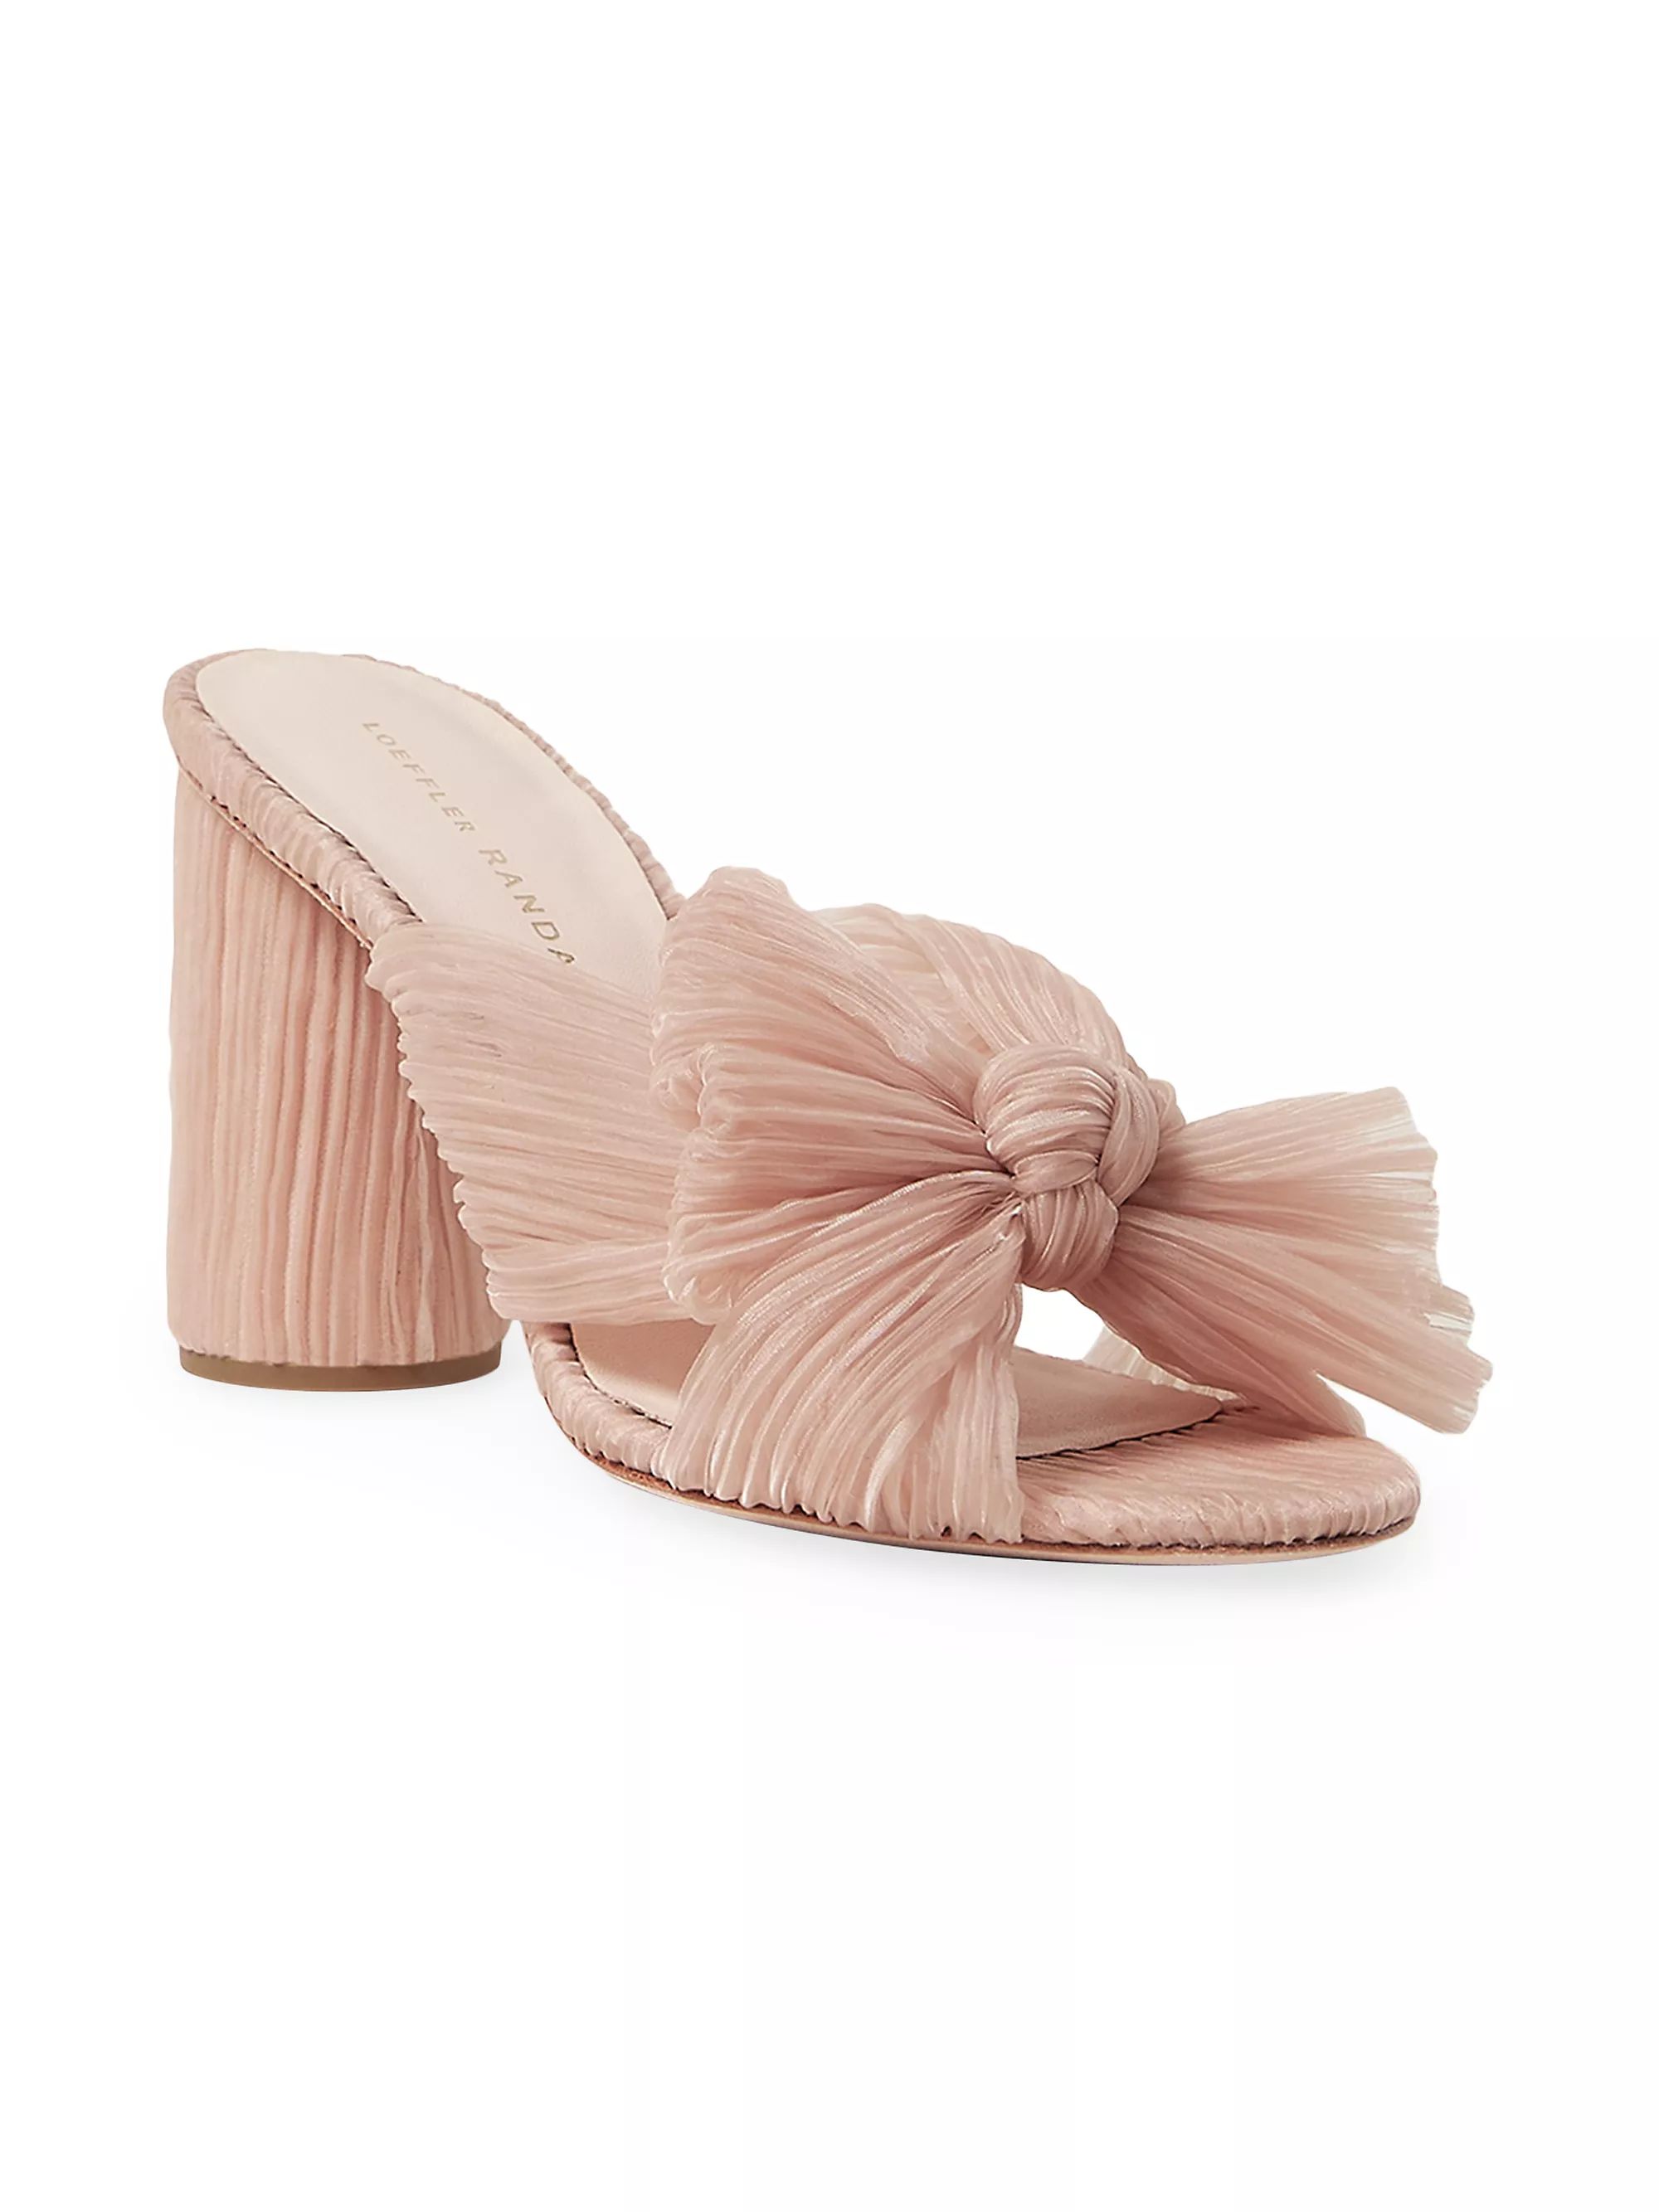 Penny Knotted Mules | Saks Fifth Avenue